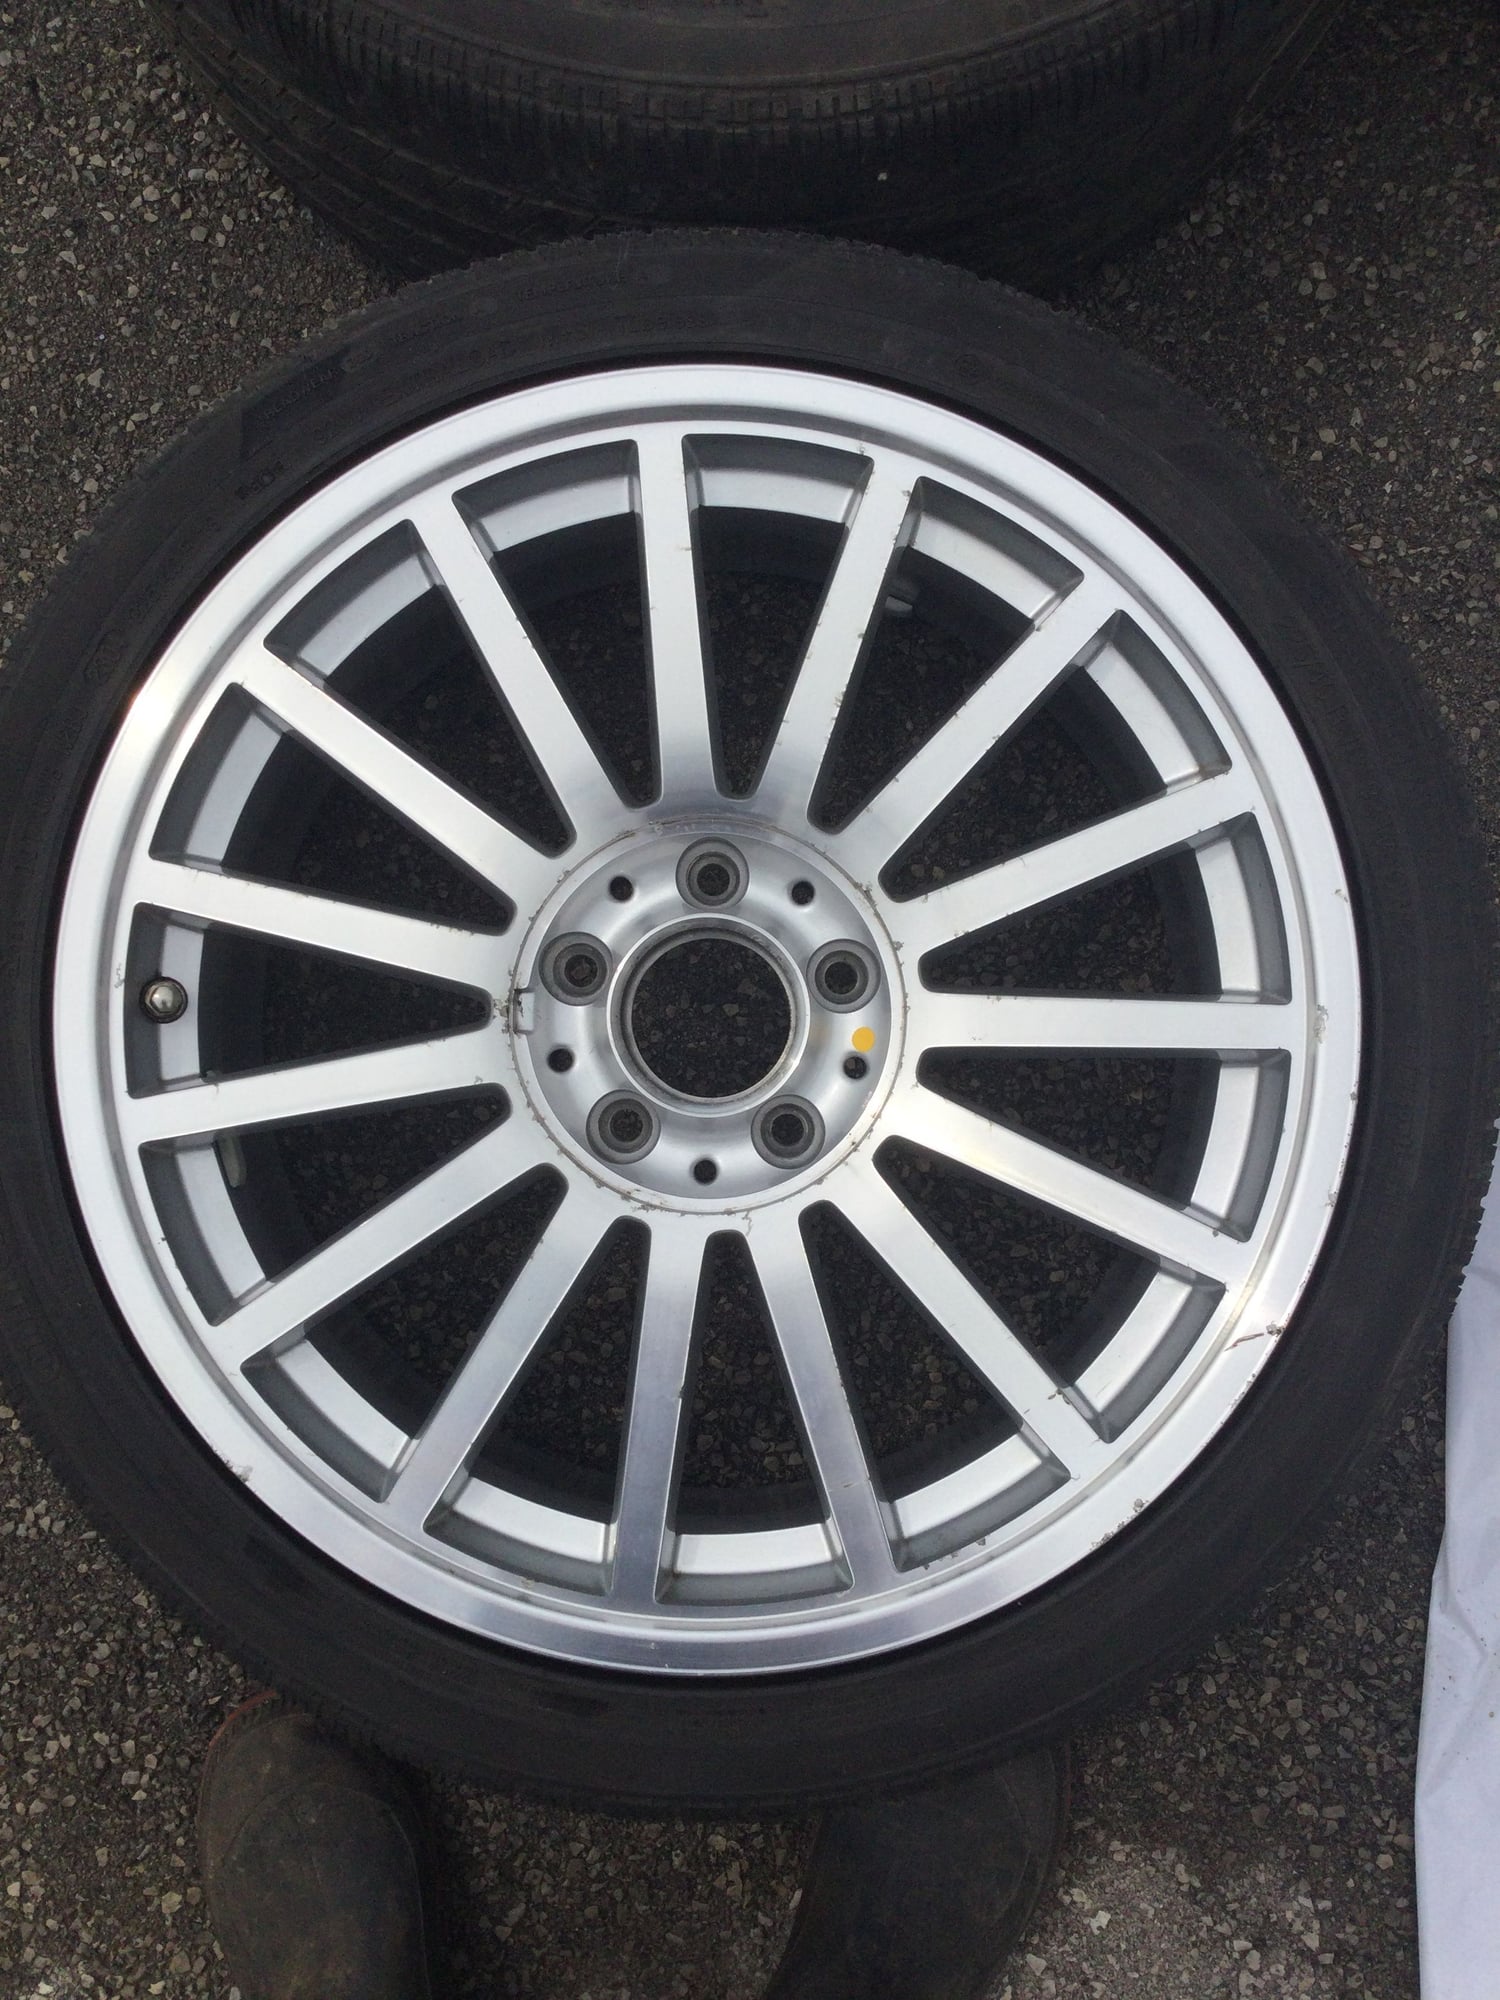 Wheels and Tires/Axles - SRT6 Wheels - Used - 2005 to 2006 Chrysler Crossfire - Grimsby, ON L3M3J6, Canada